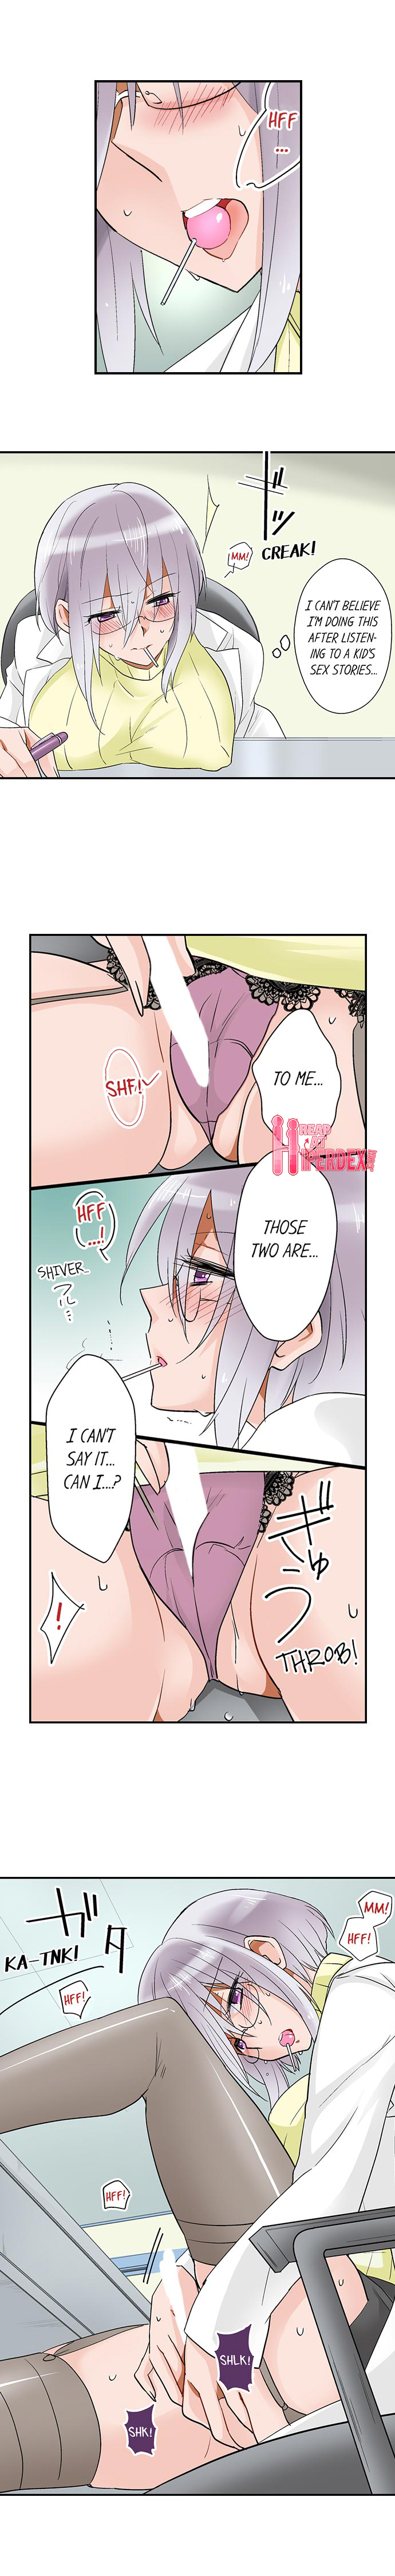 Teaching Sex to My Amnesiac Sister - Chapter 9 Page 6